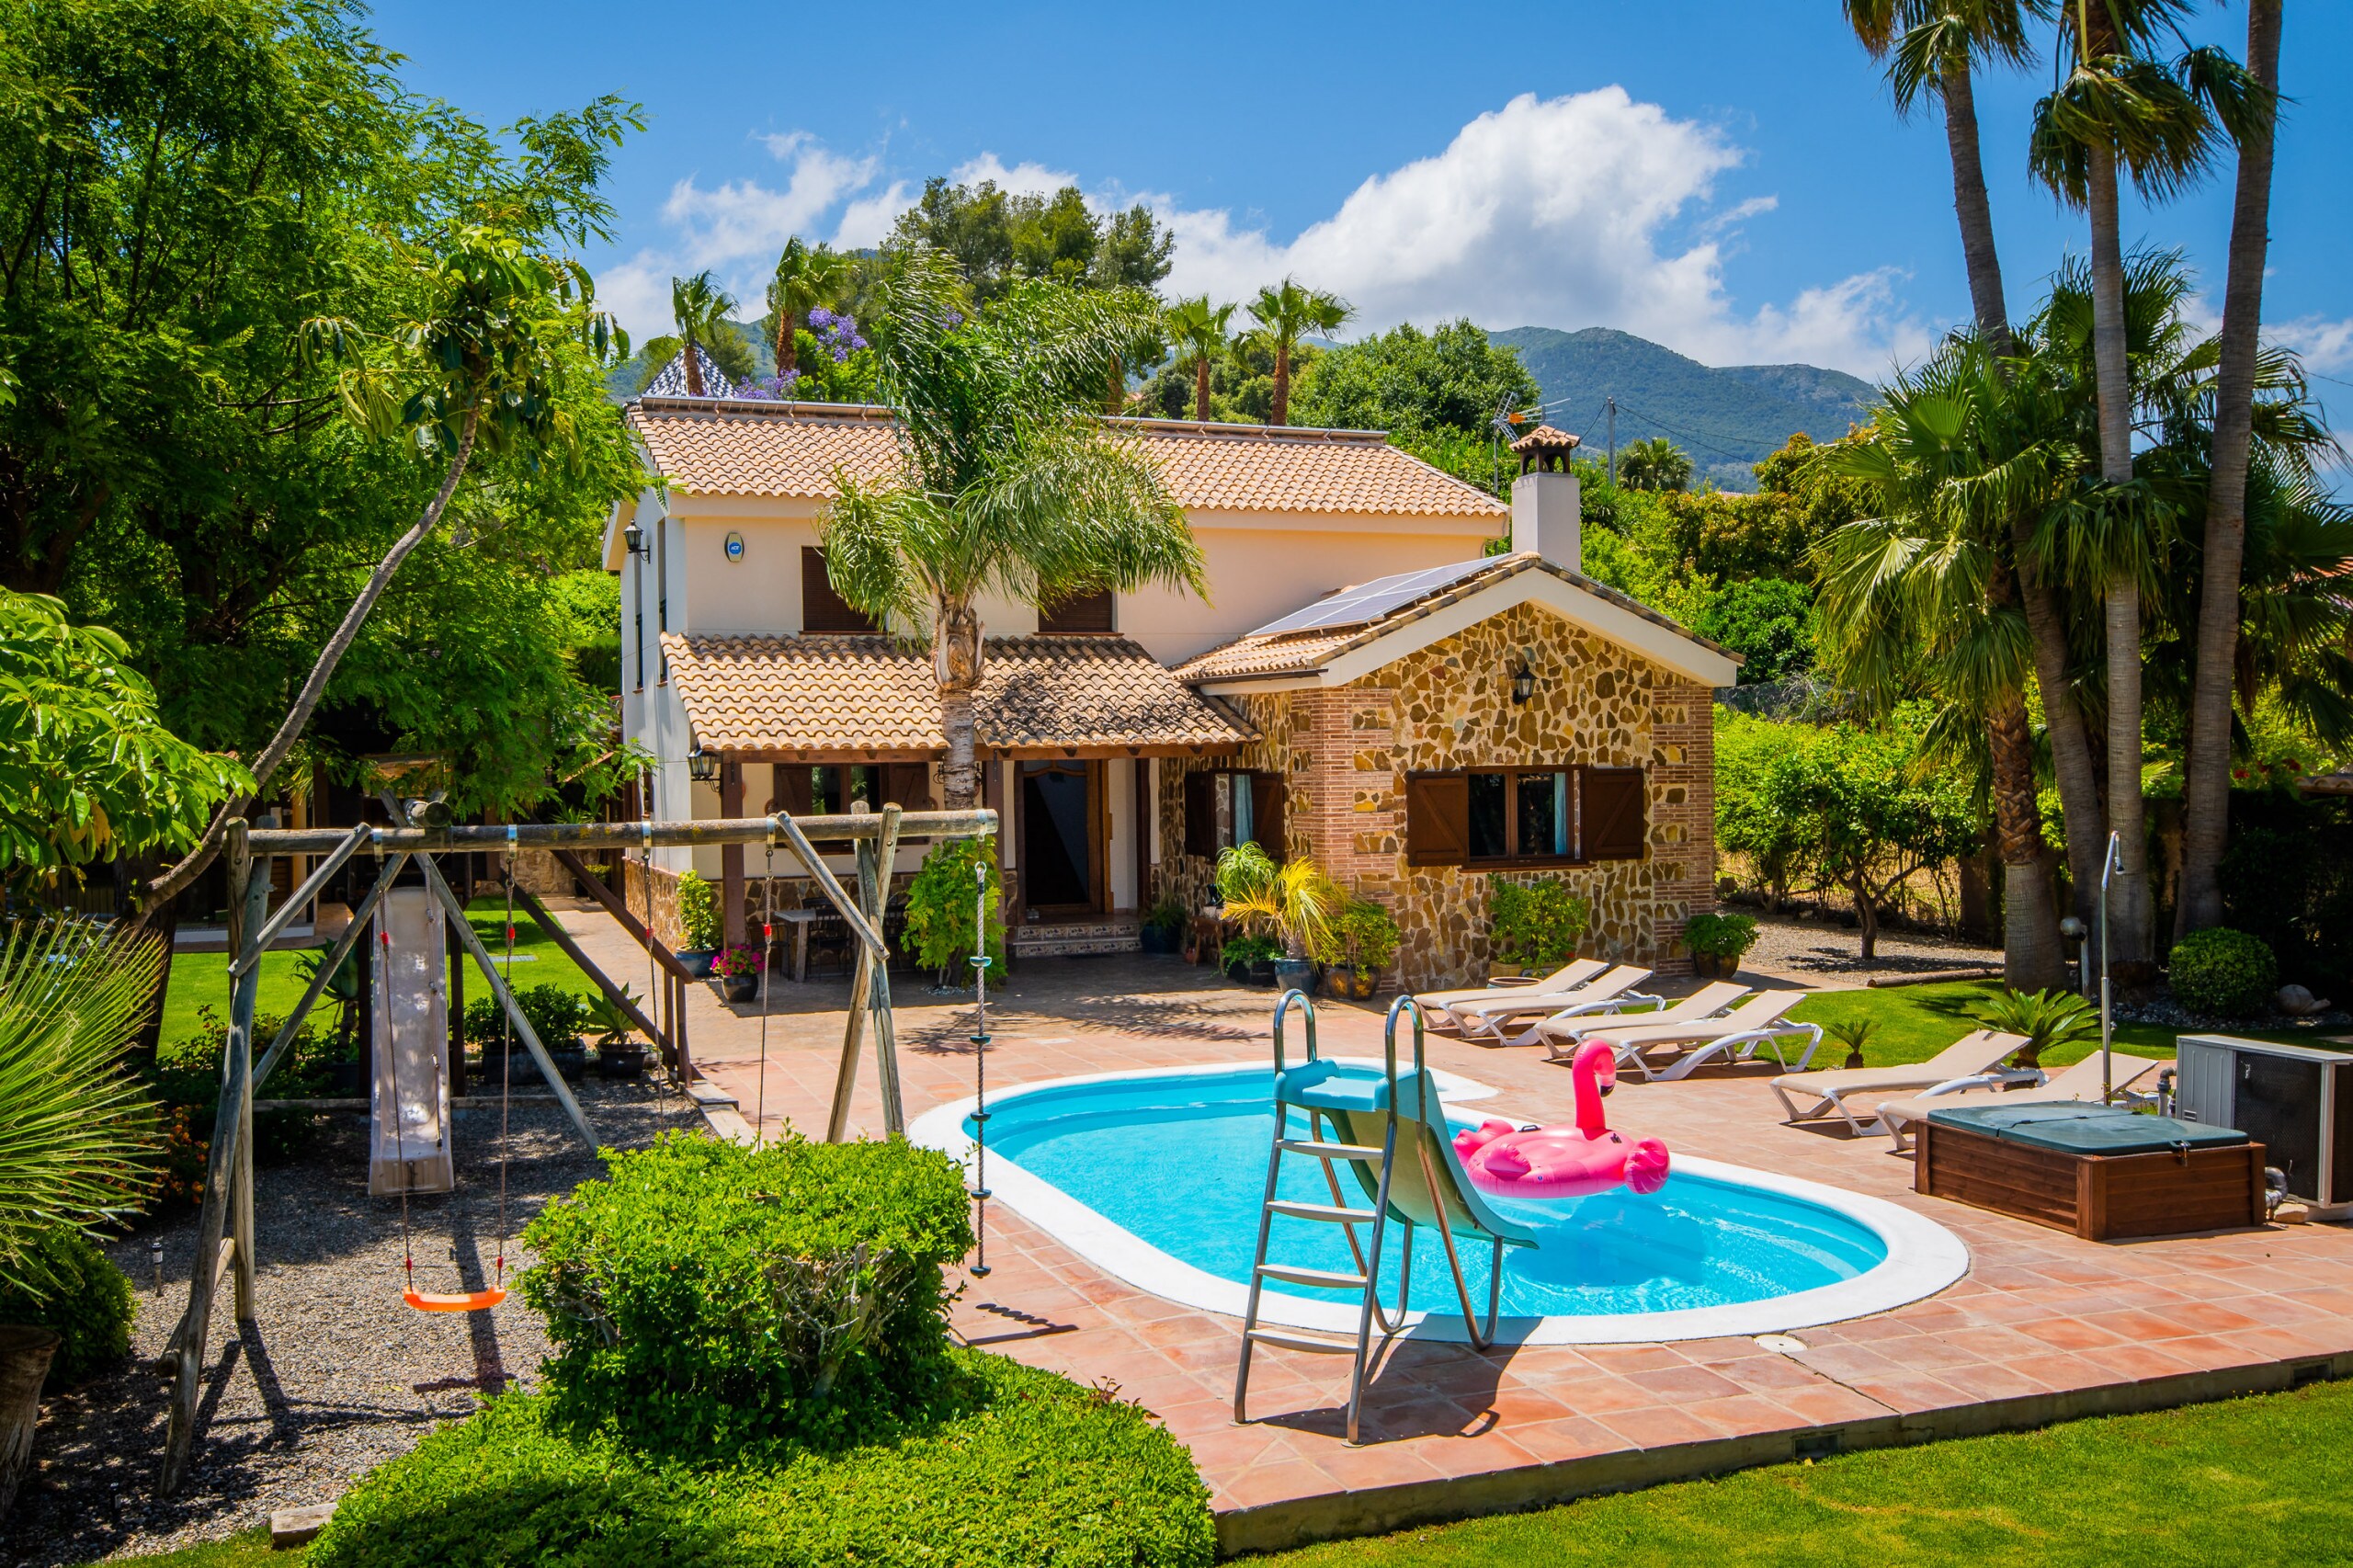 Family accommodation with electric car charger and heated pool on request.